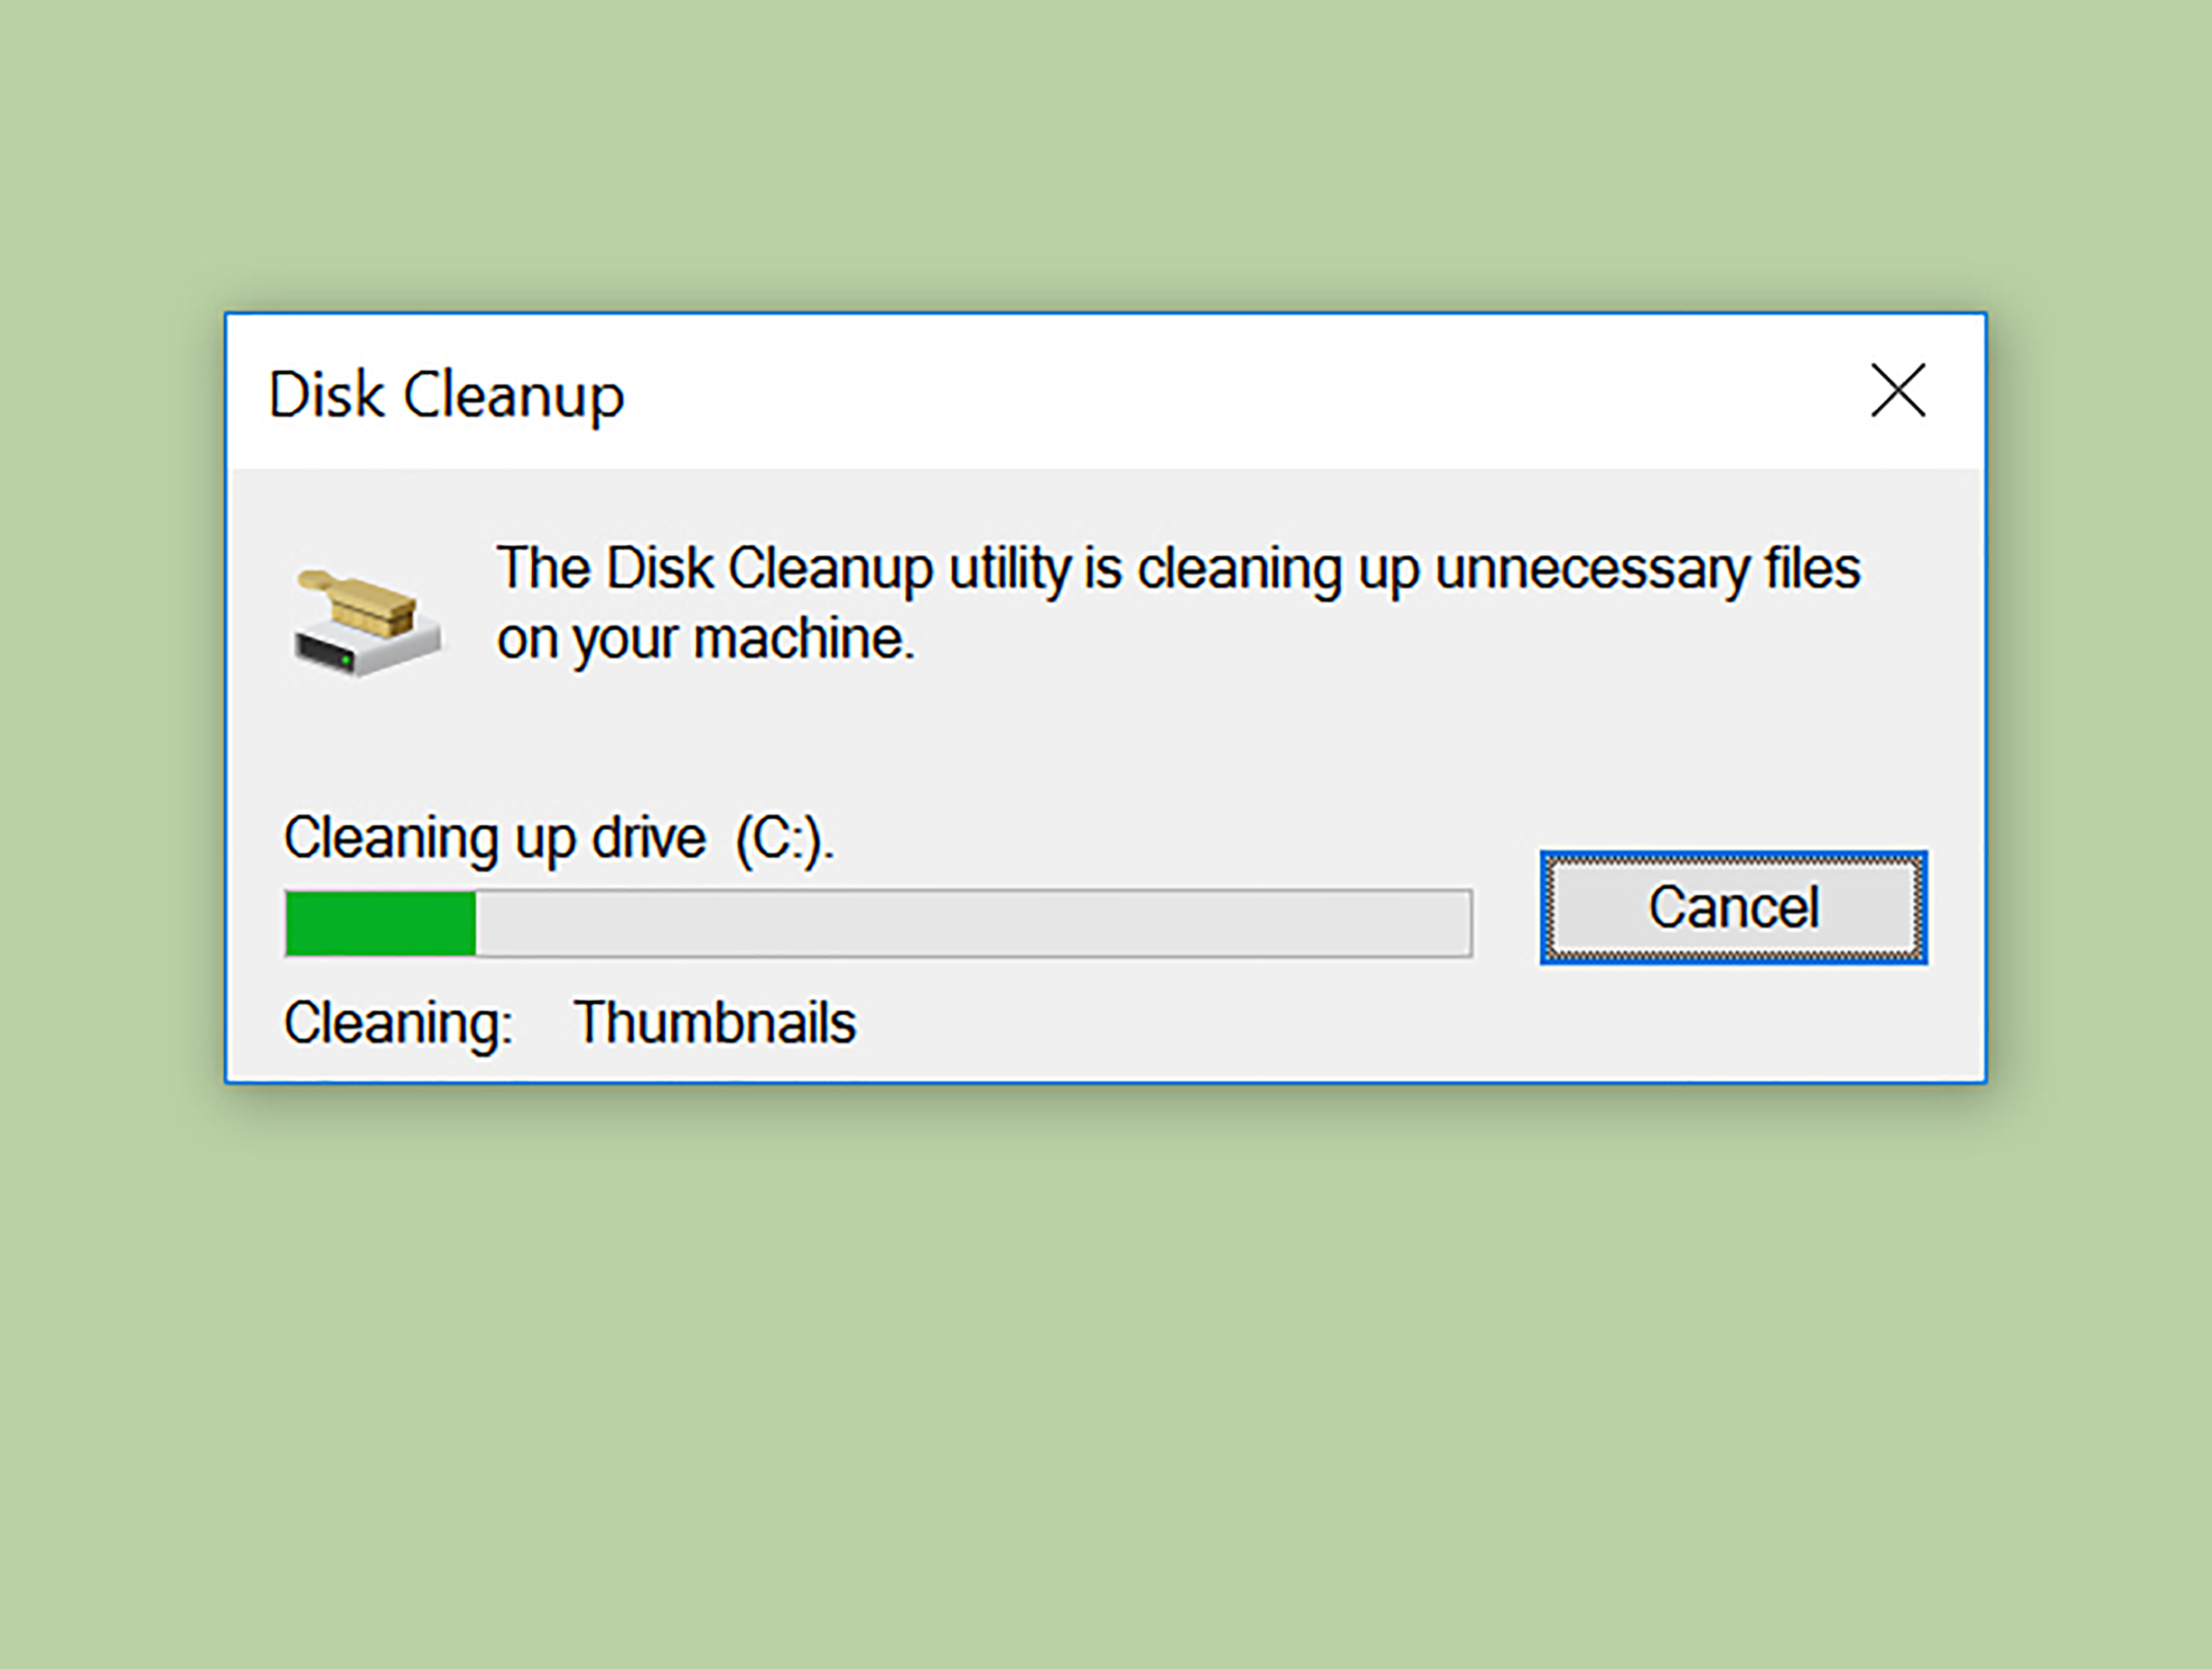 window disk cleanup tool